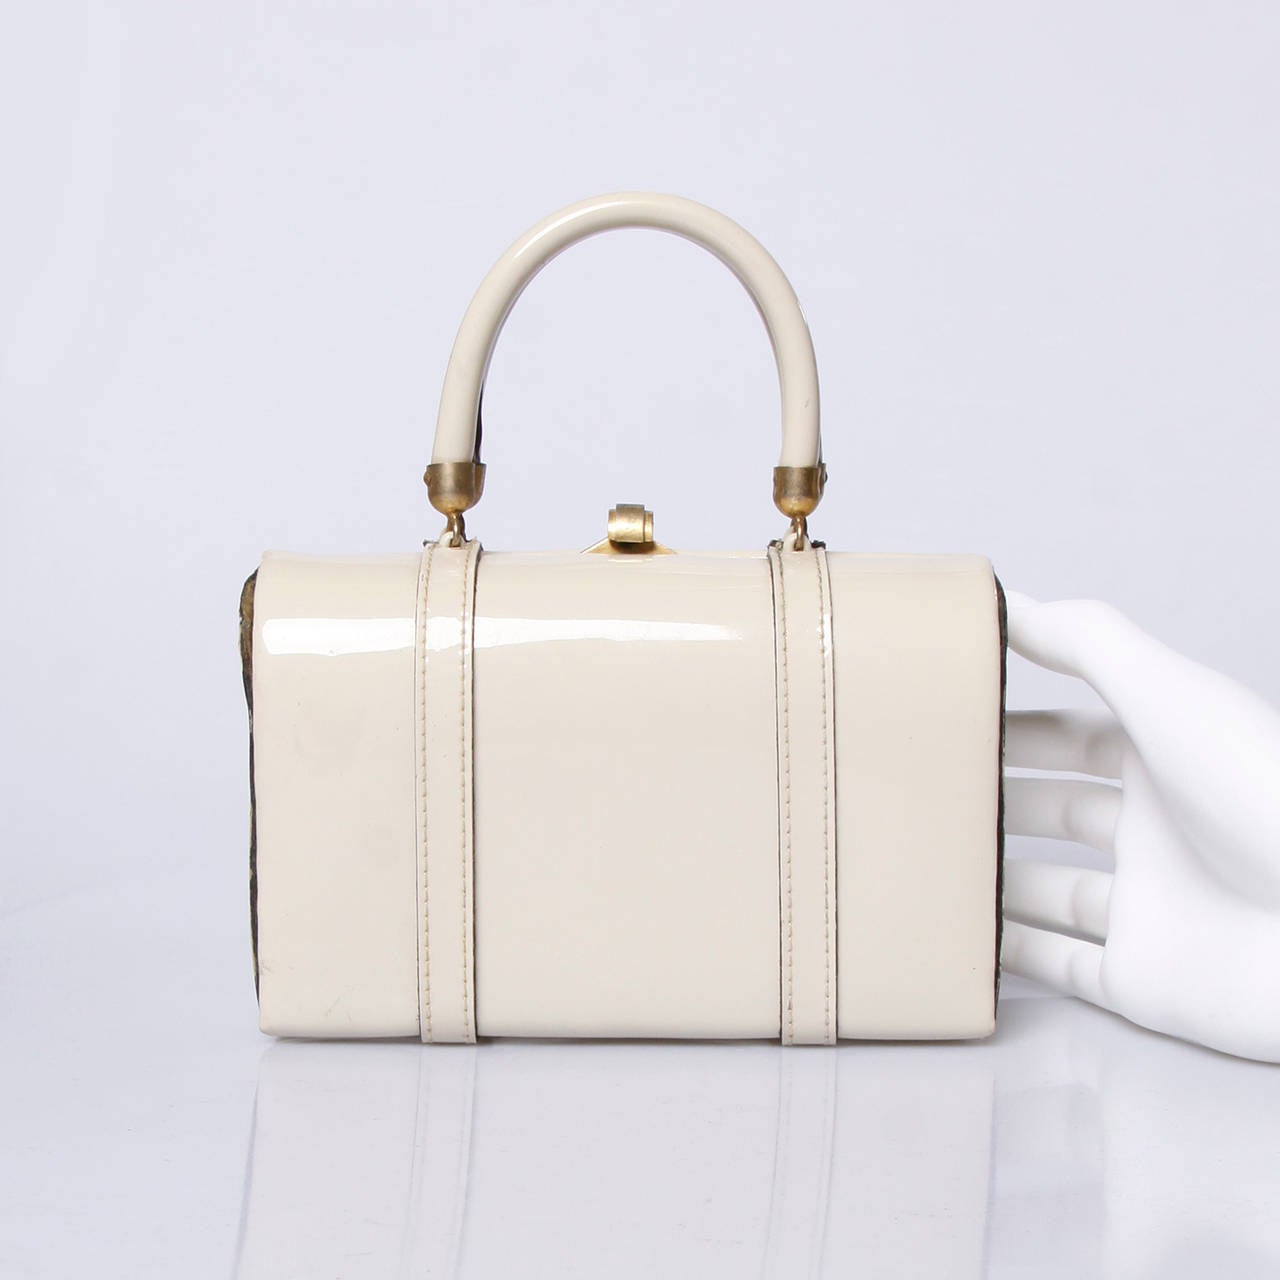 Cream patent leather miniature satchel style hand bag by Tano of Madrid. Buckle detail and darling extra small size!

Details:

Inside Pockets
Top Clasp Closure
Color: Cream
Fabric: Patent Leather/ Leather/ Gold Plated Hardware
Label: Tano